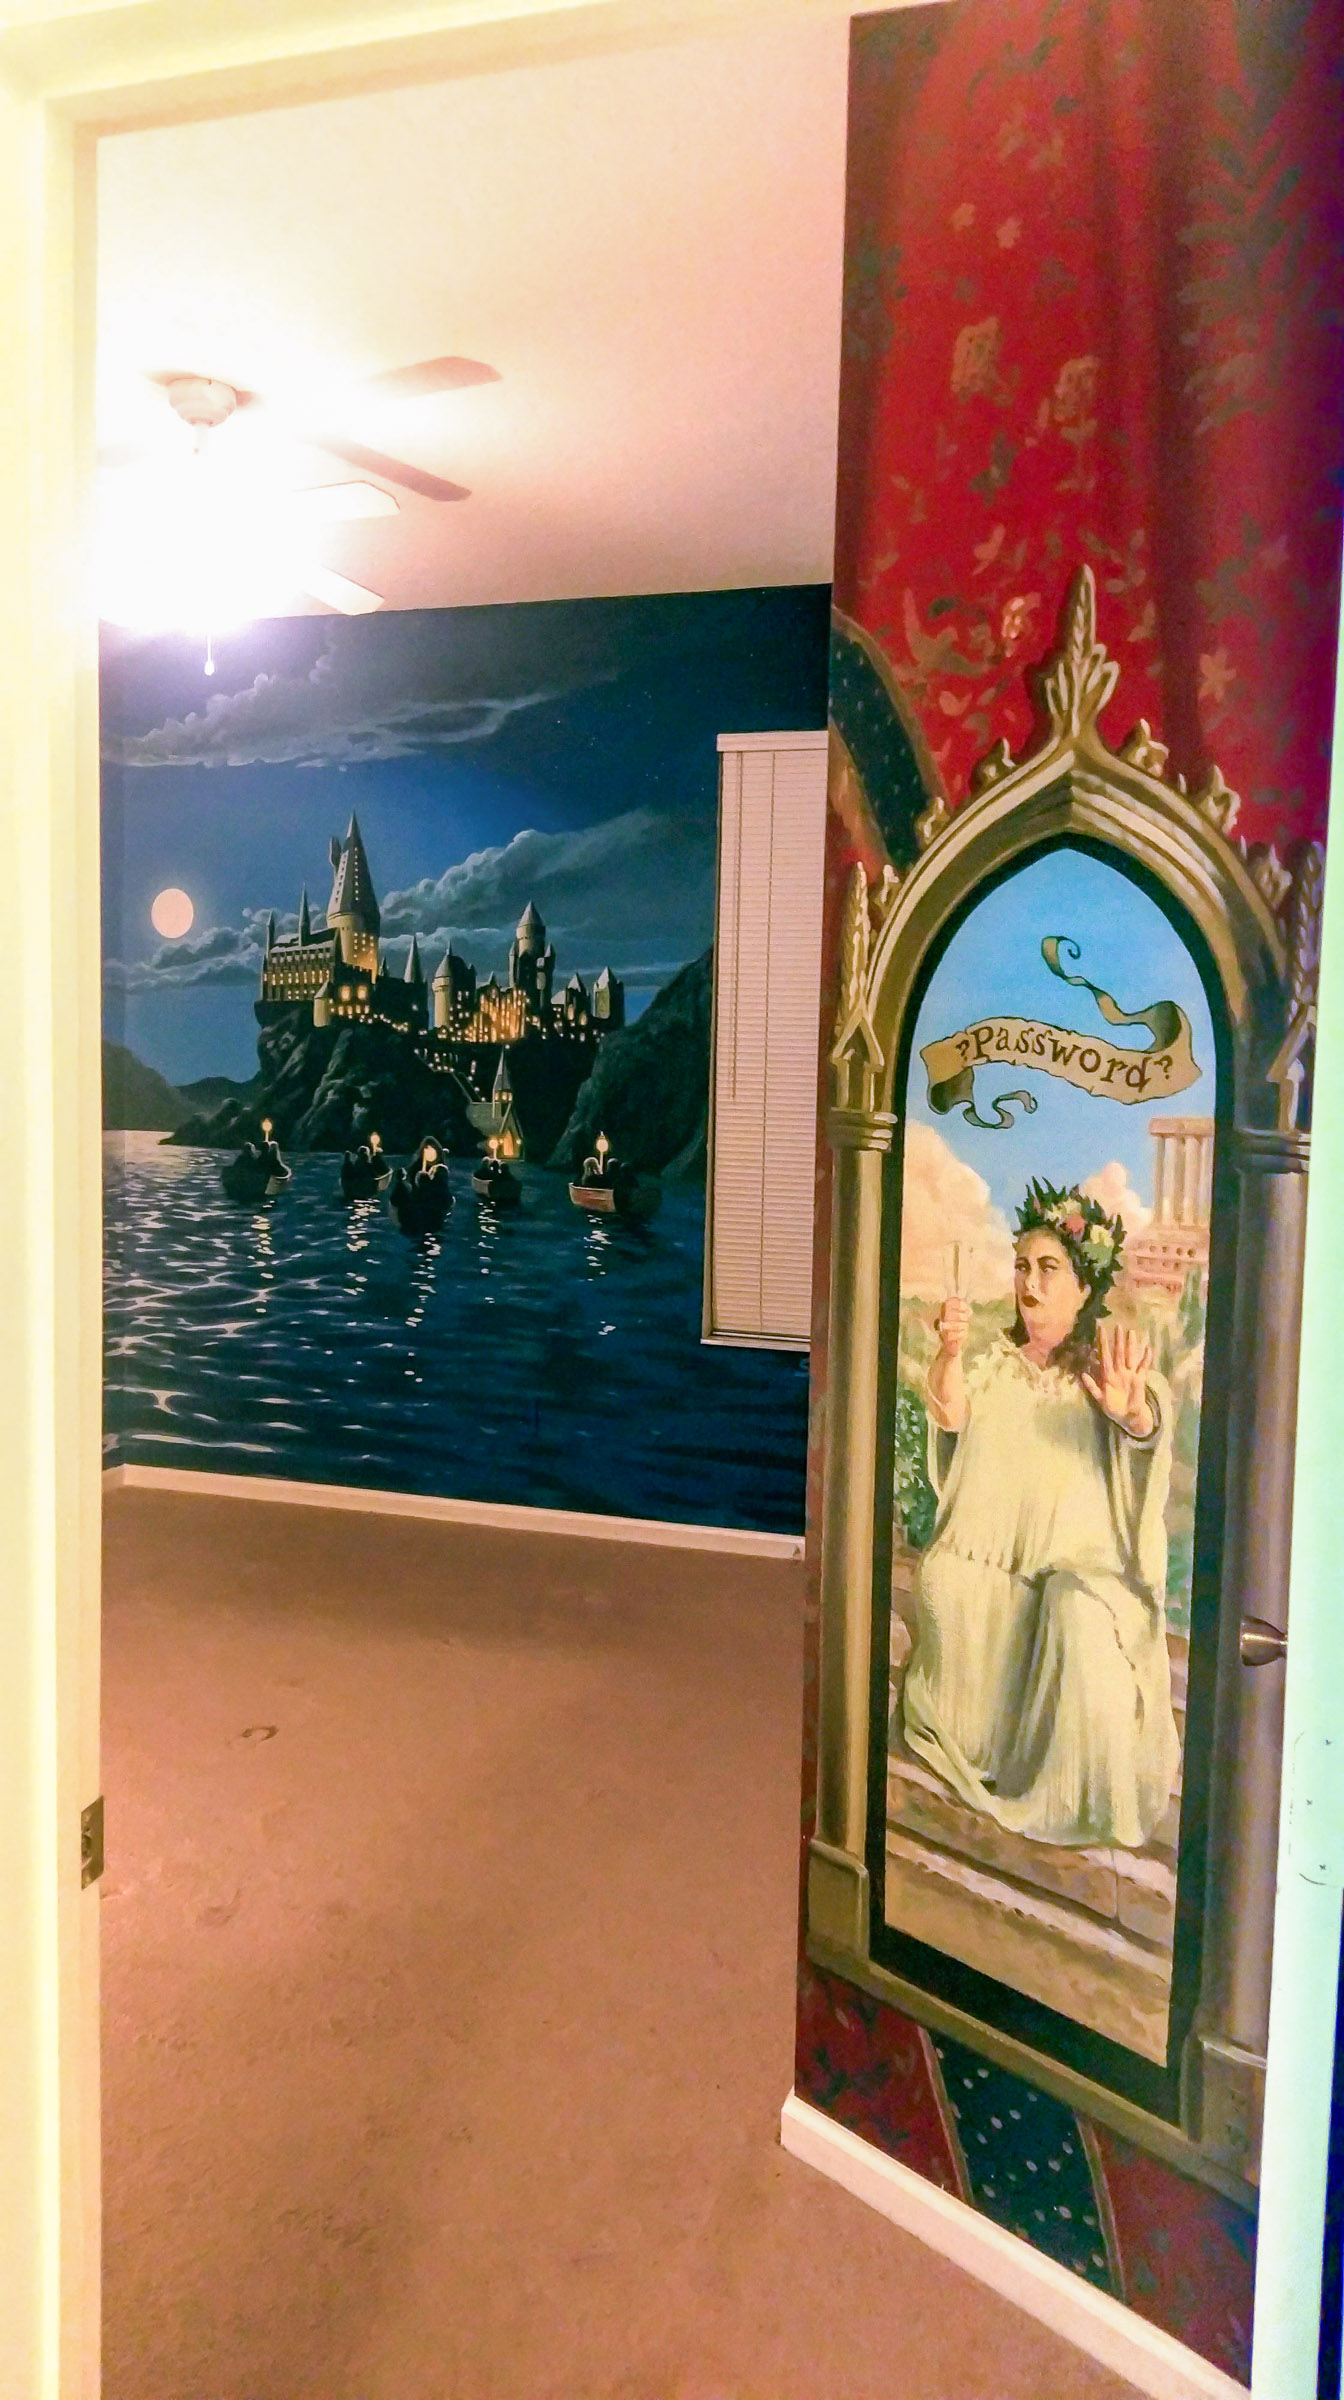 Harry Potter wall mural with Hogwarts and the Fat Lady Portrait